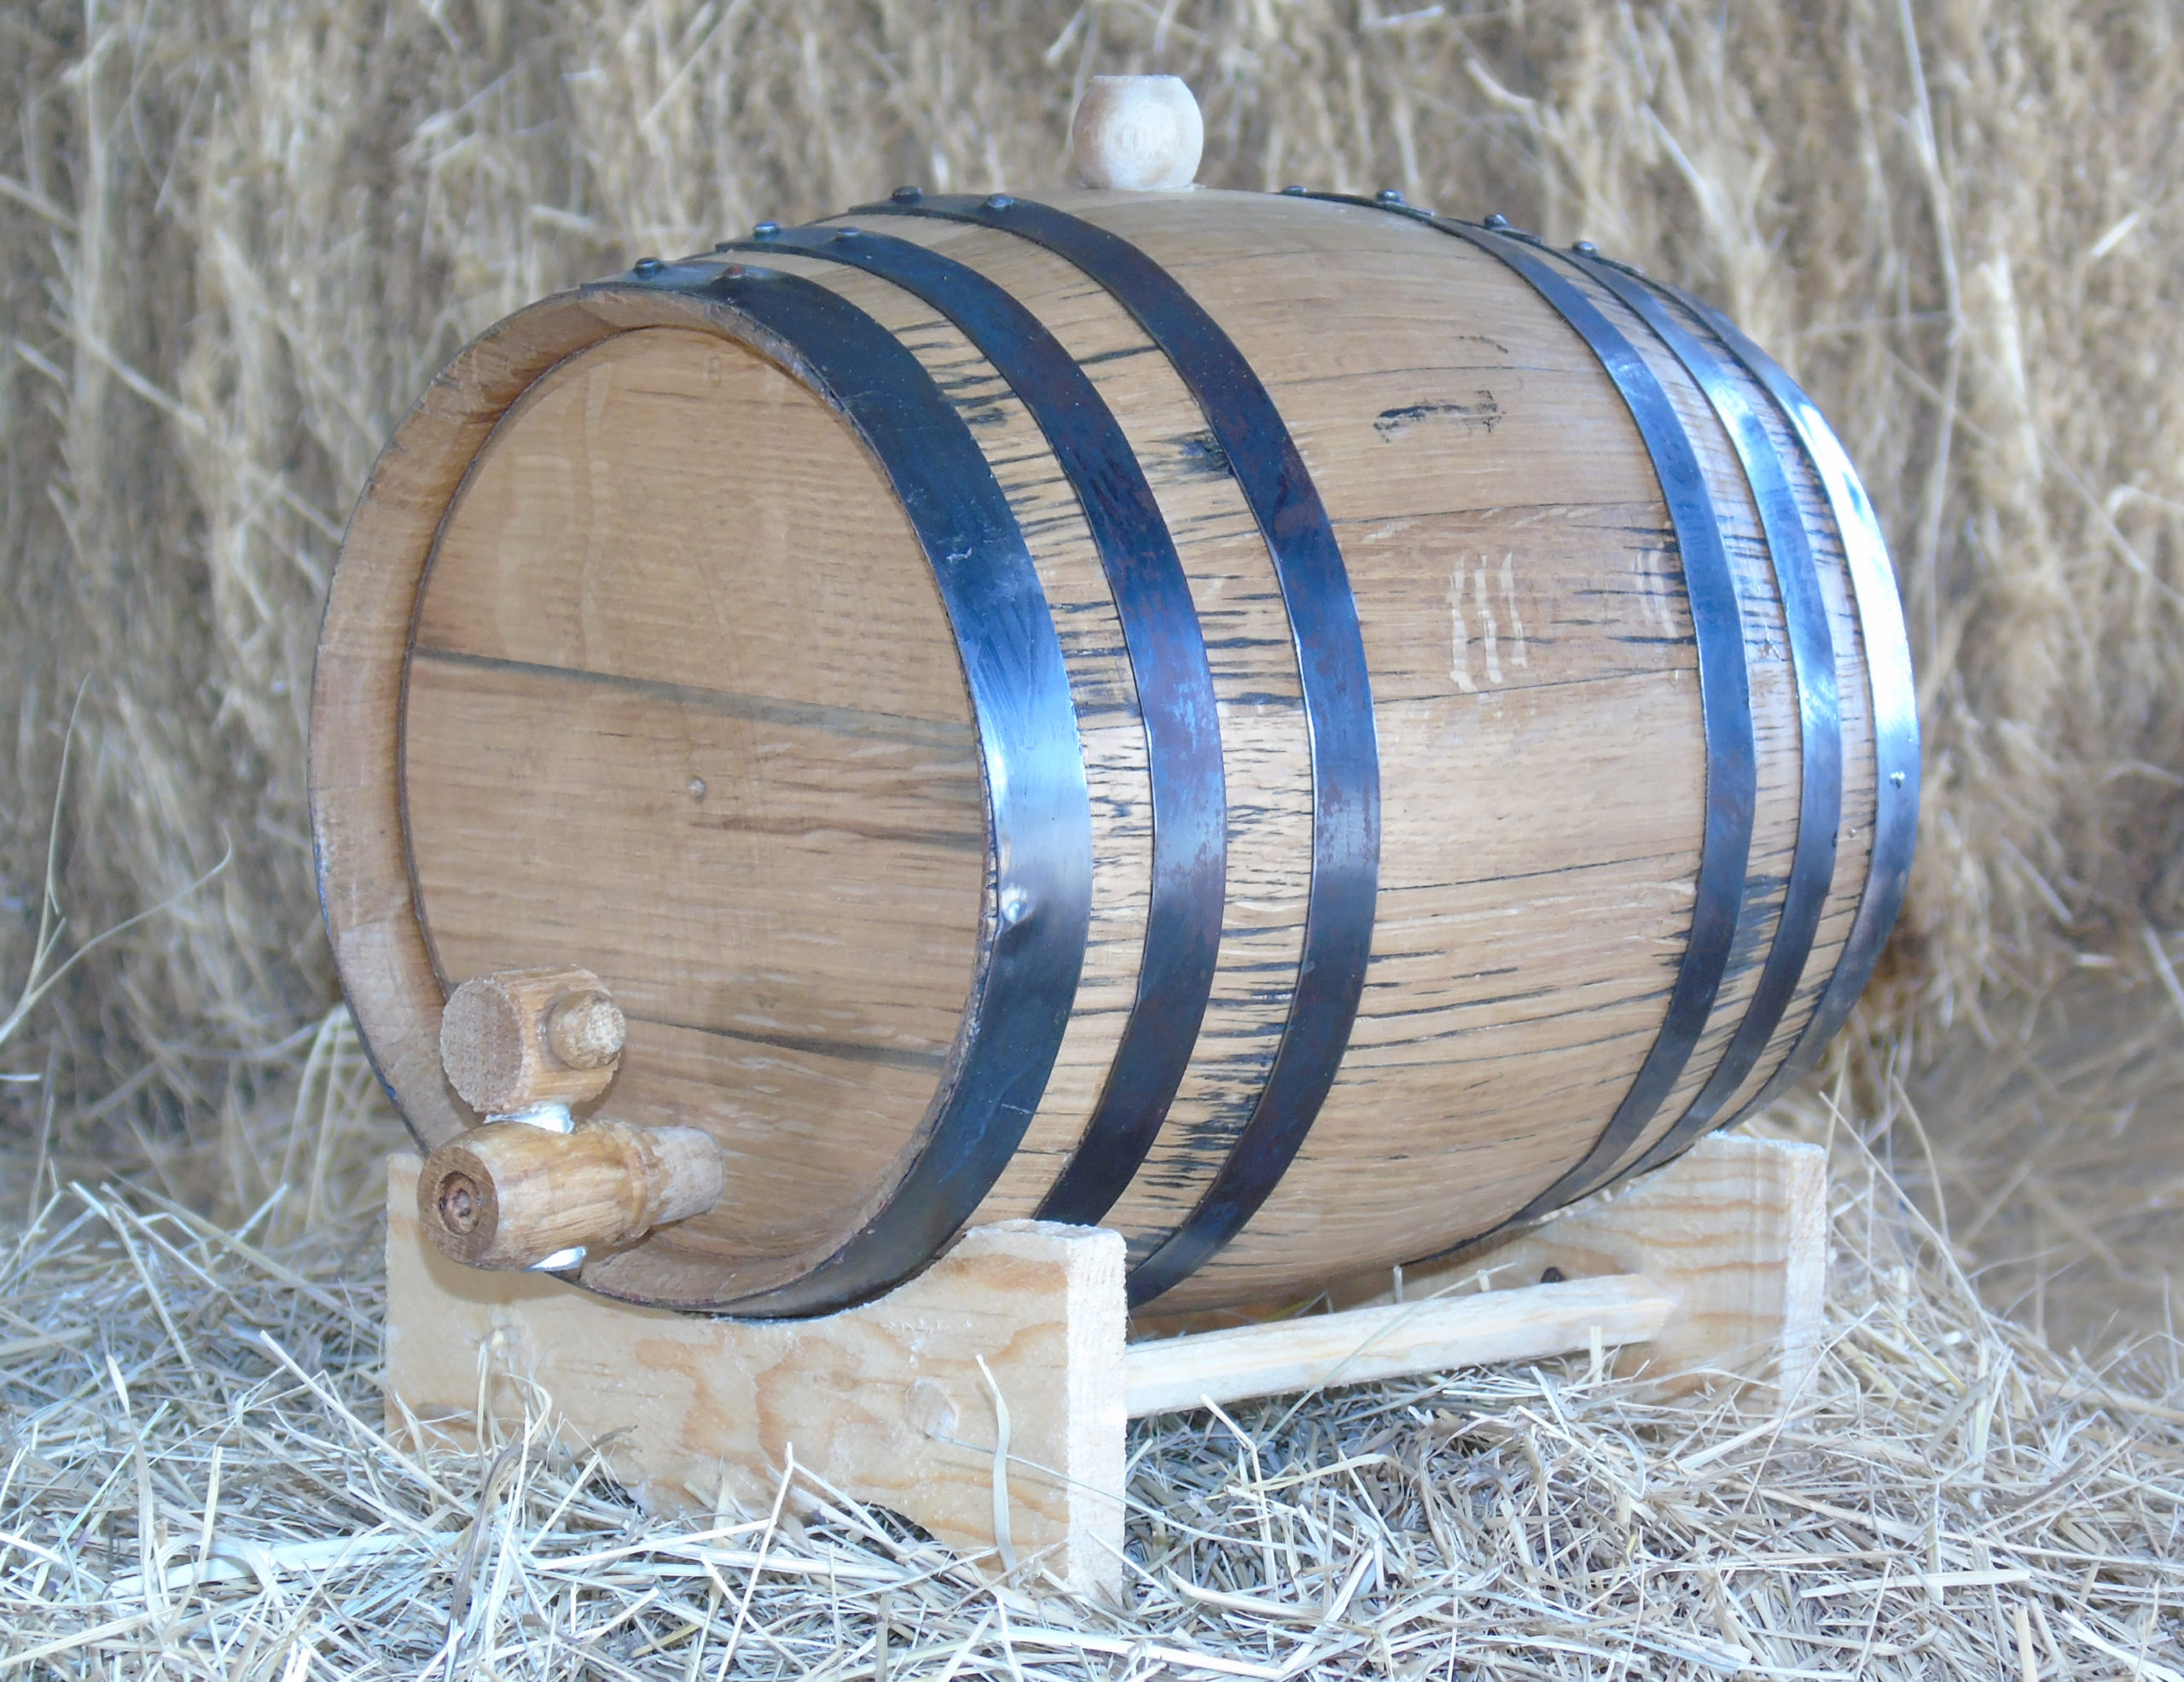 Details about   OAK BARRELS 3 LITER FOR WHISKEY OR SPIRITS FREE PIRATE ENGRAVING 